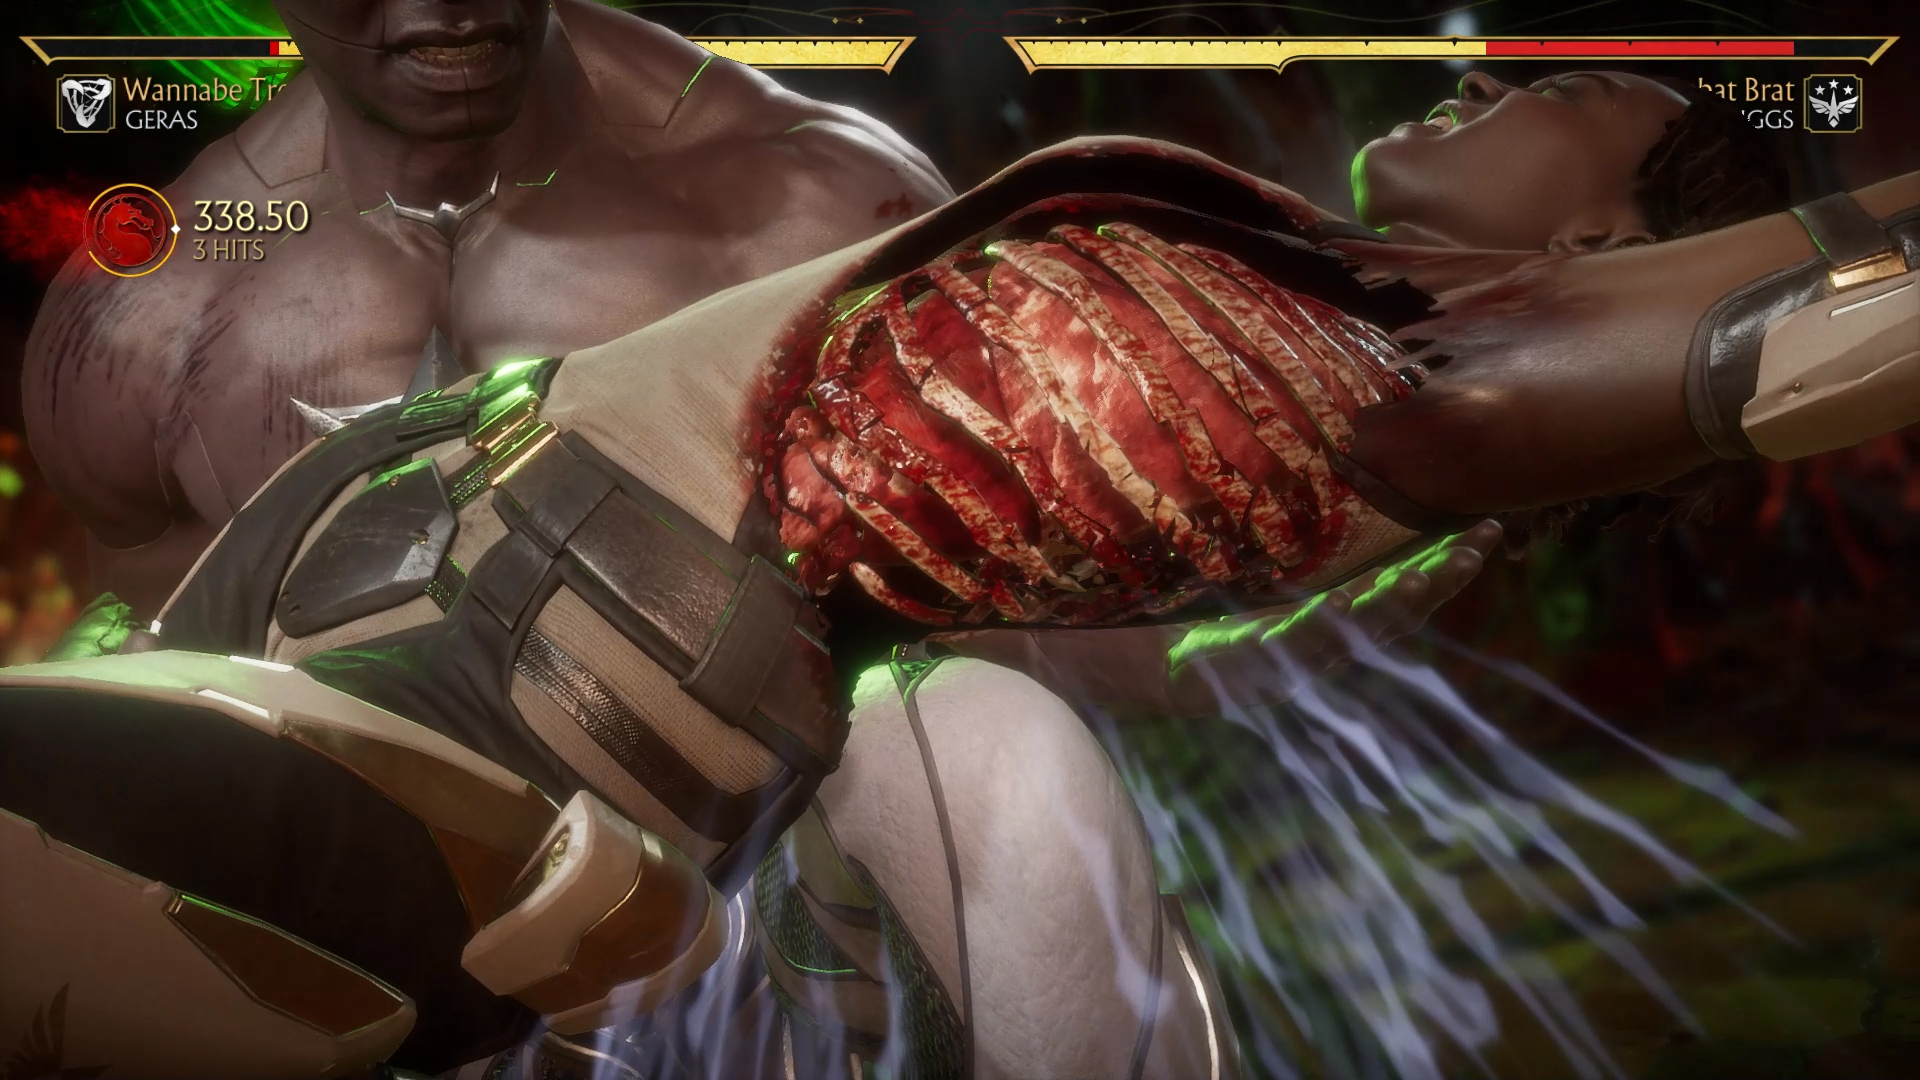 Mortal Kombat 11' Shao Kahn Gameplay, Fatality and Fatal Blow Released